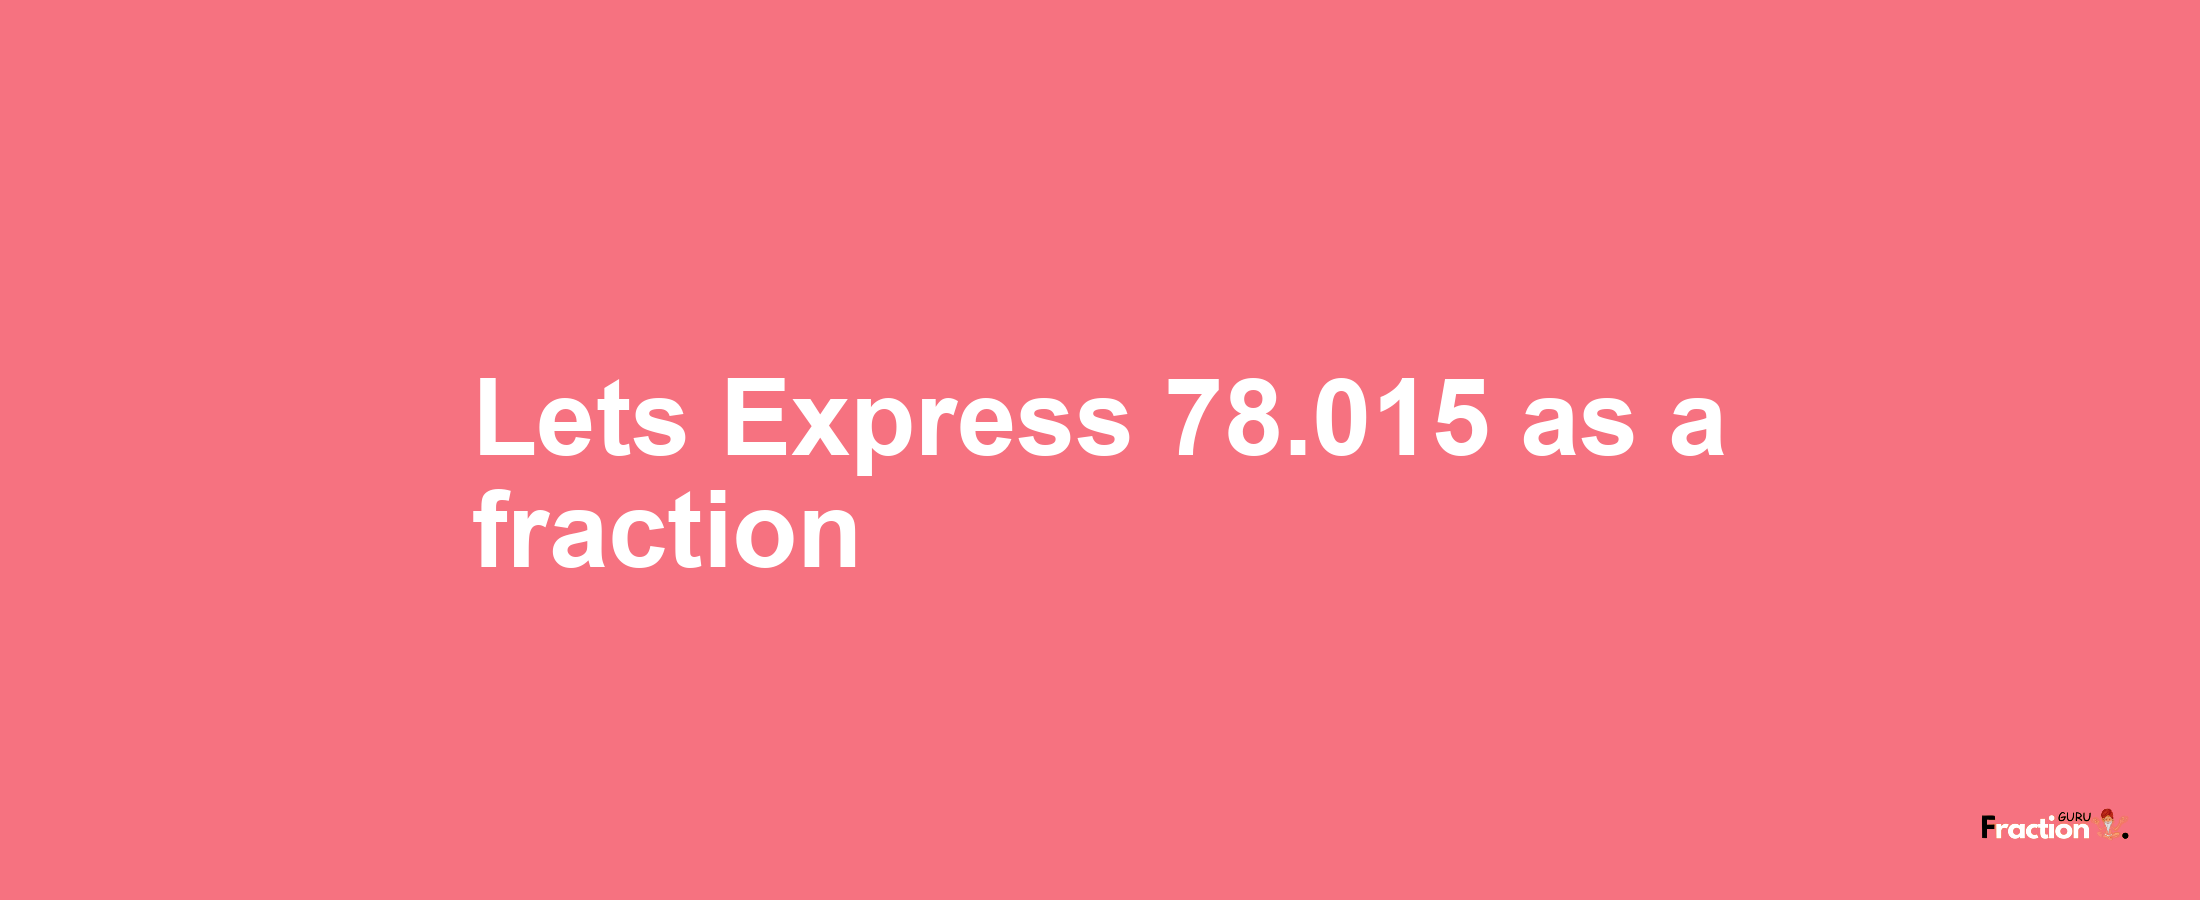 Lets Express 78.015 as afraction